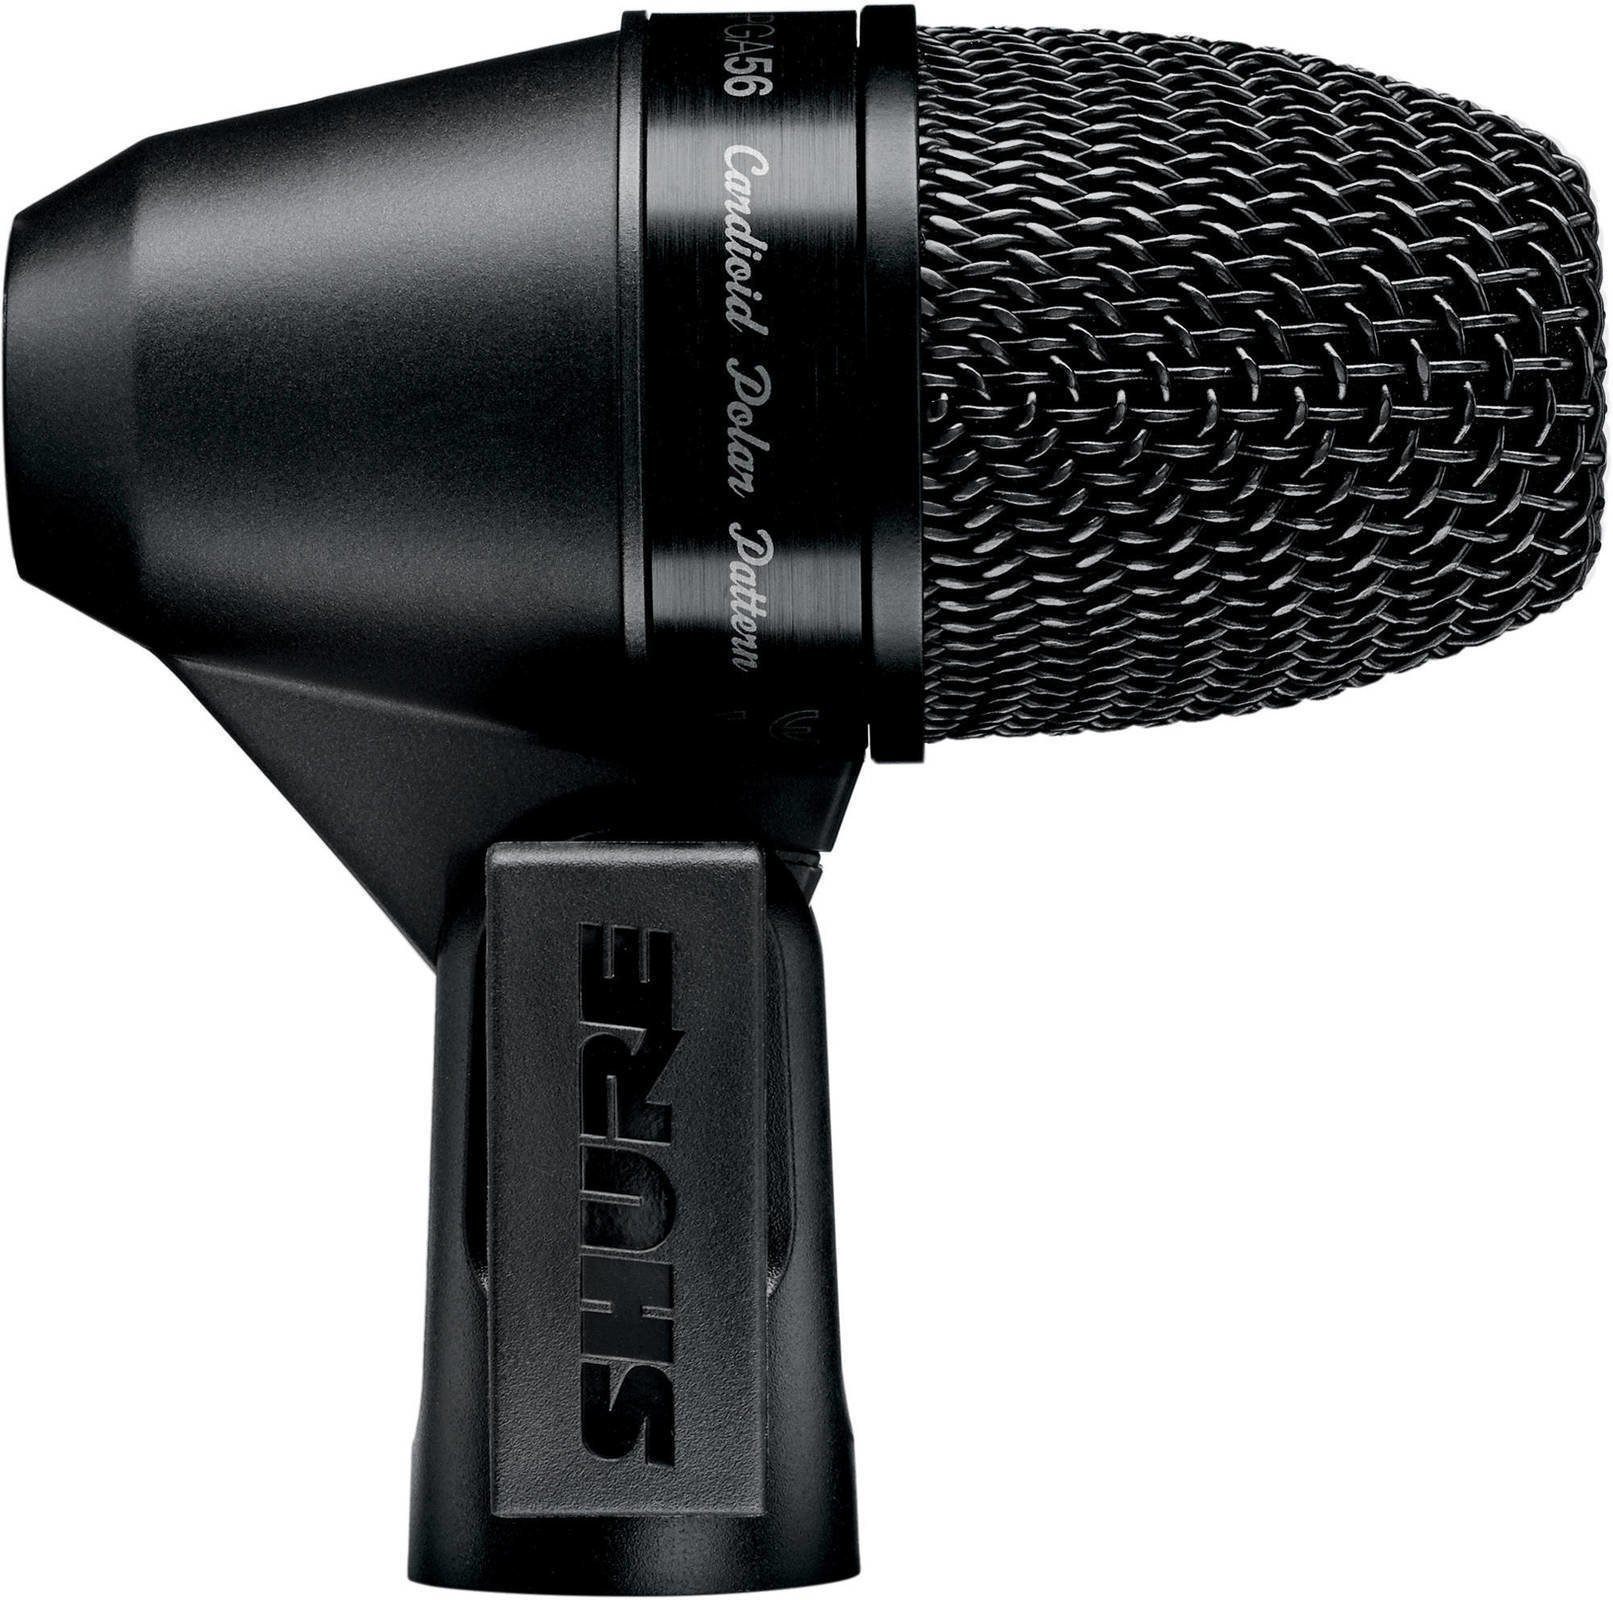 Microphone for Snare Drum Shure PGA56 Microphone for Snare Drum